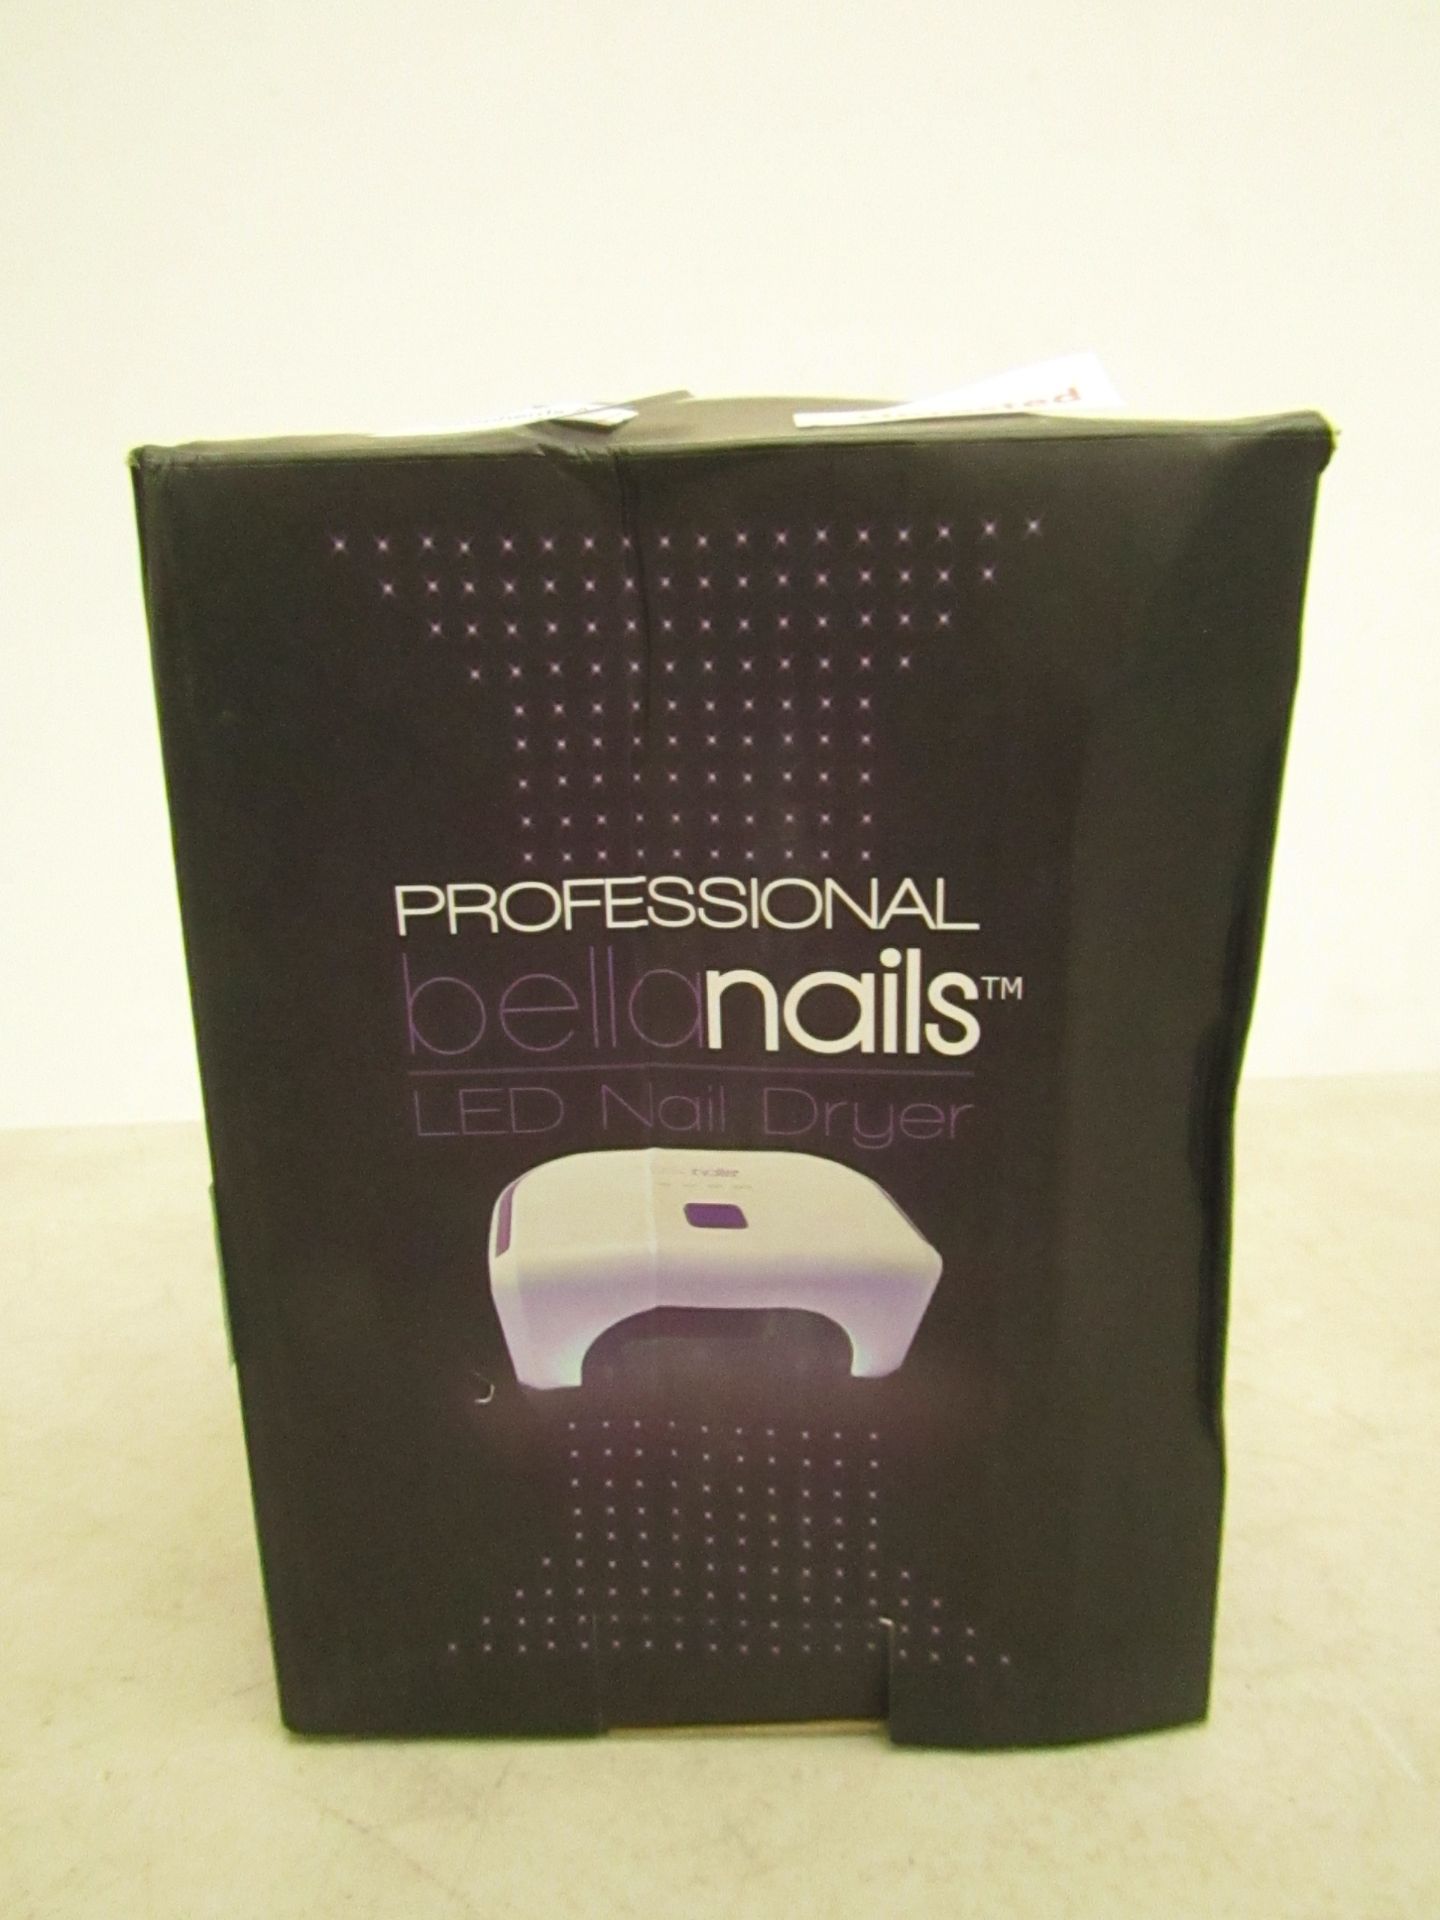 Professional bello nails LED nail dryer, untested and boxed.